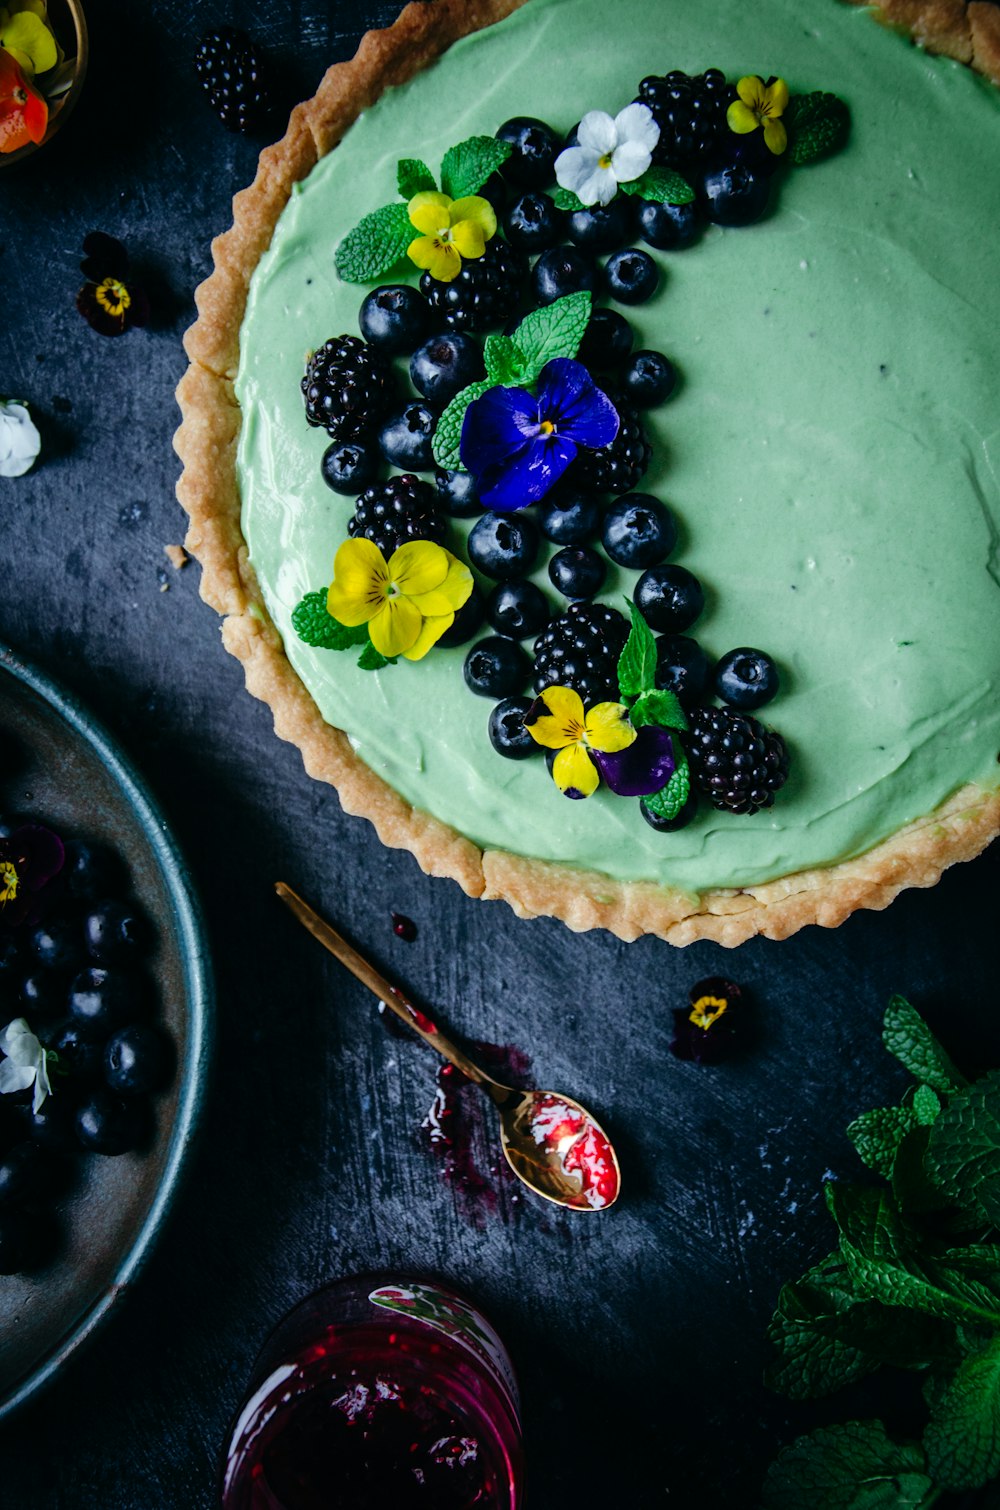 a pie with blueberries, raspberries, and flowers on it